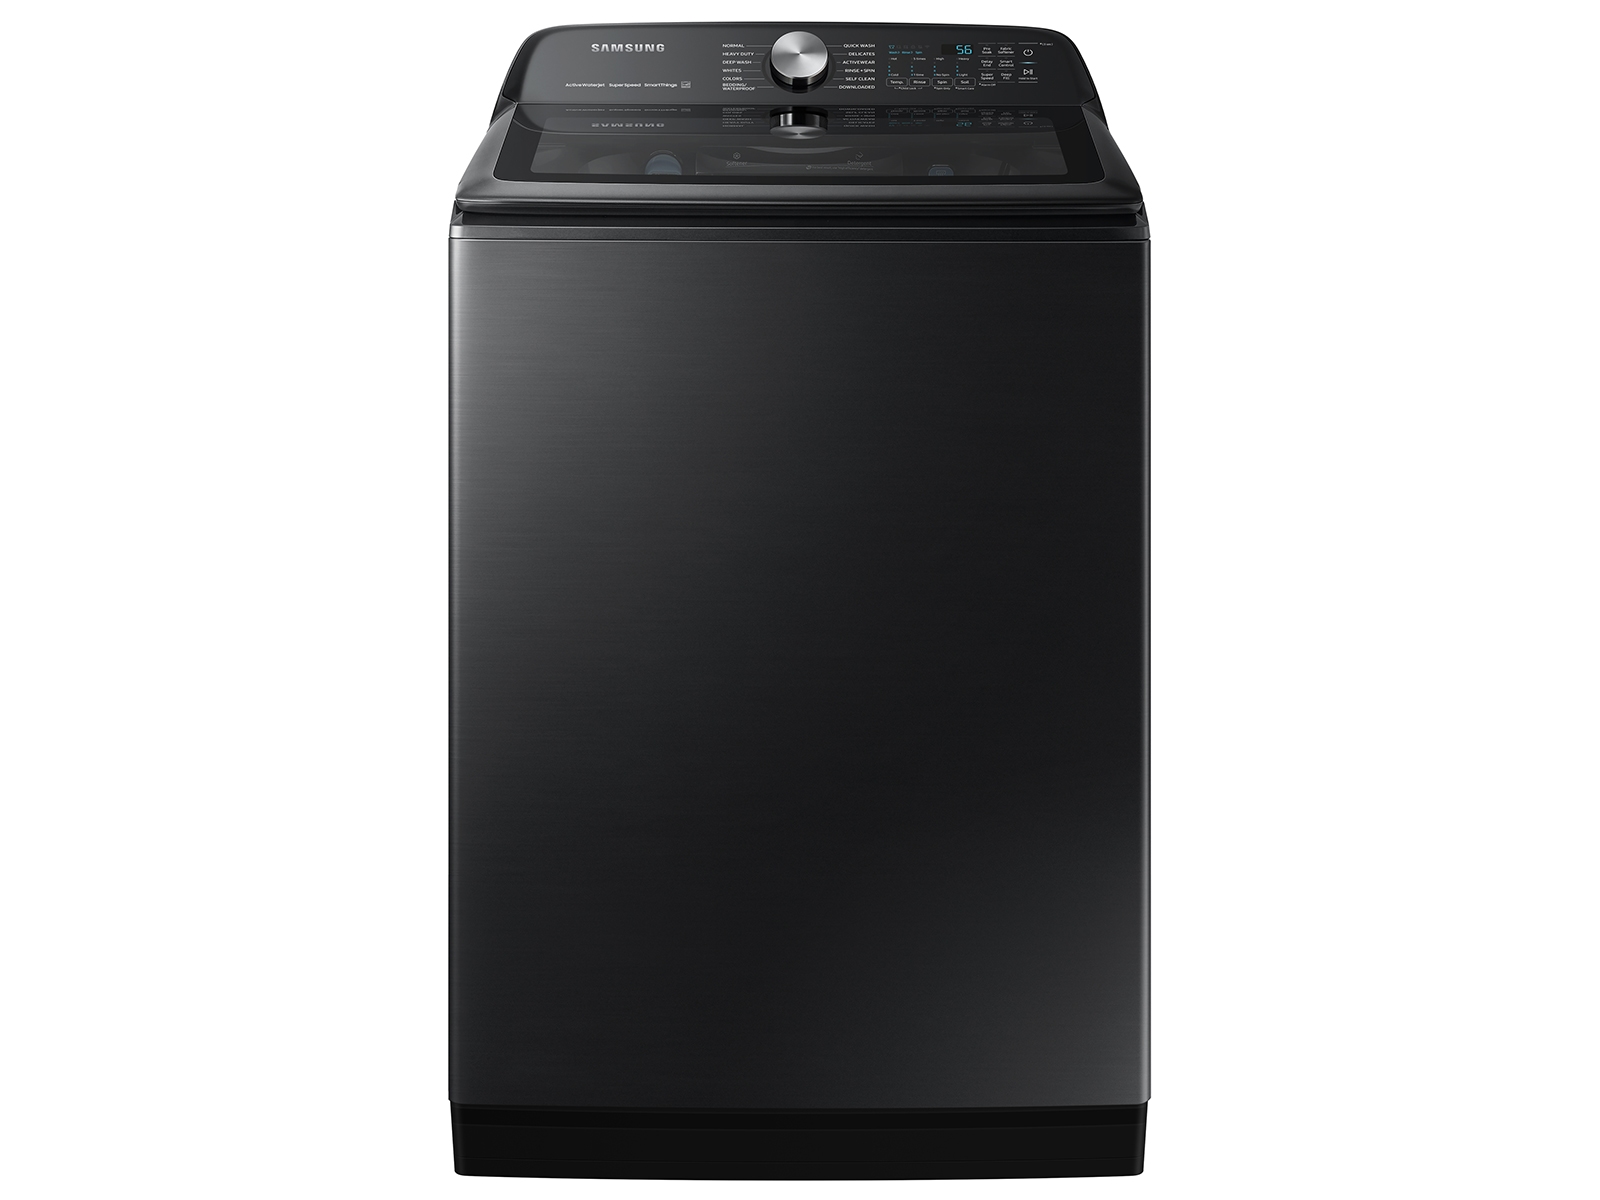 Samsung 5.2 cu. ft. Large Capacity Smart Top Load Washer with Super Speed Wash in Brushed Black(WA52A5500AV/US)